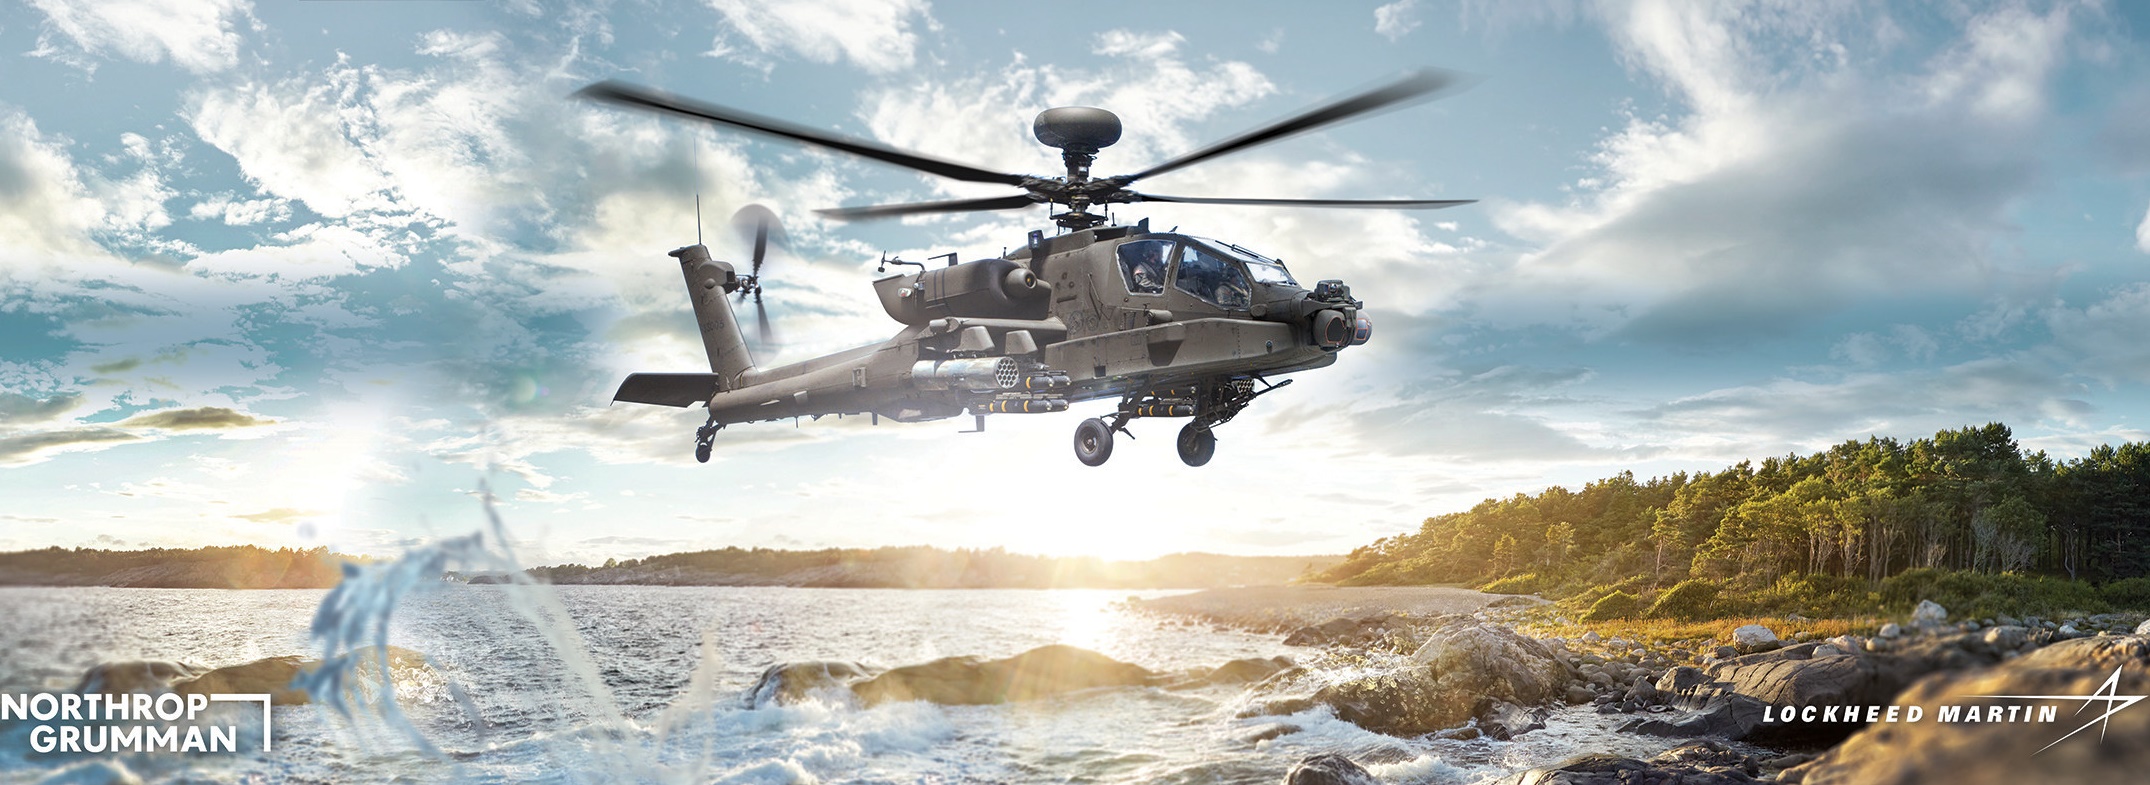 Morocco, Netherlands, and India to Gain AN/APG-78 Longbow FCR for AH-64E Apache Attack Helicopters